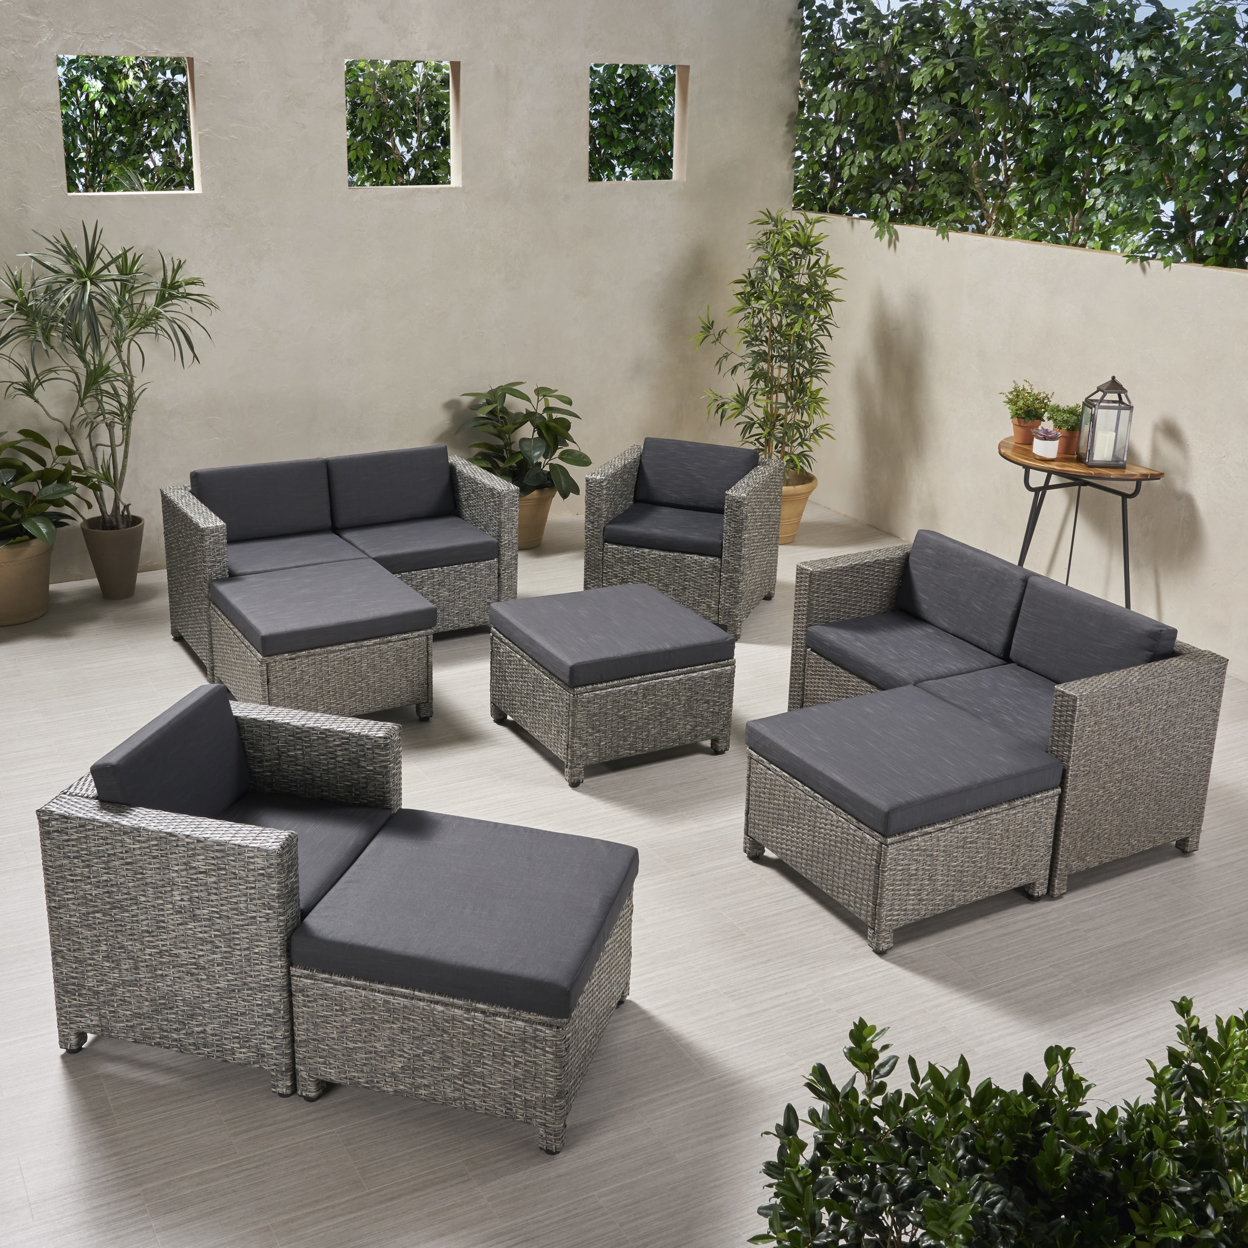 Freda Outdoor 6 Seater Wicker Chat Set With Ottomans - Mix Black + Dark Gray